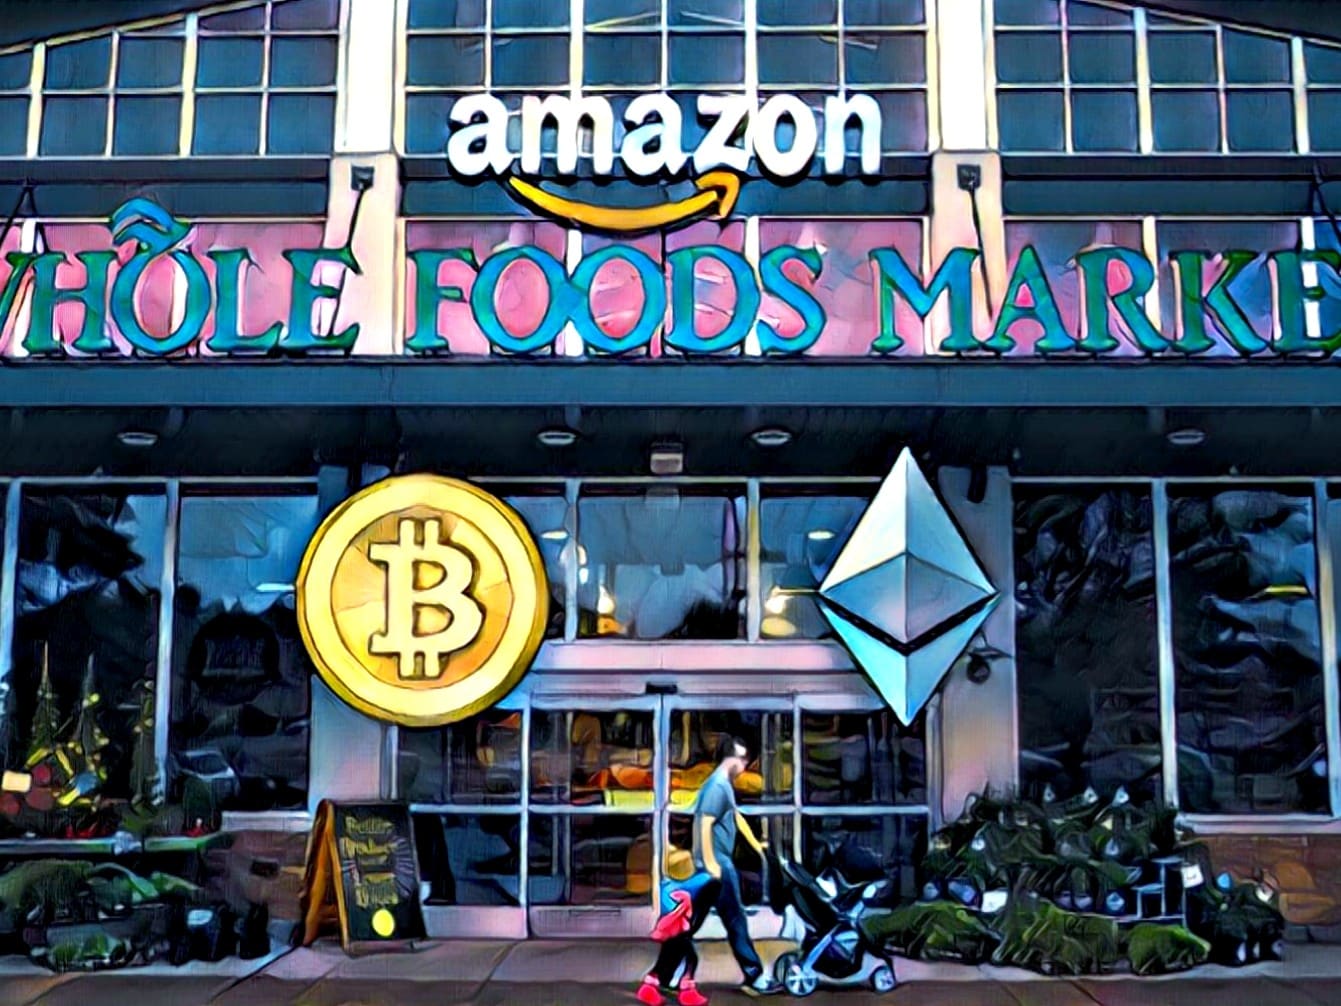 Amazon’s Whole Foods and Other Major Retailers Will Now Accept Cryptocurrency Payments Thanks to the Spedn App